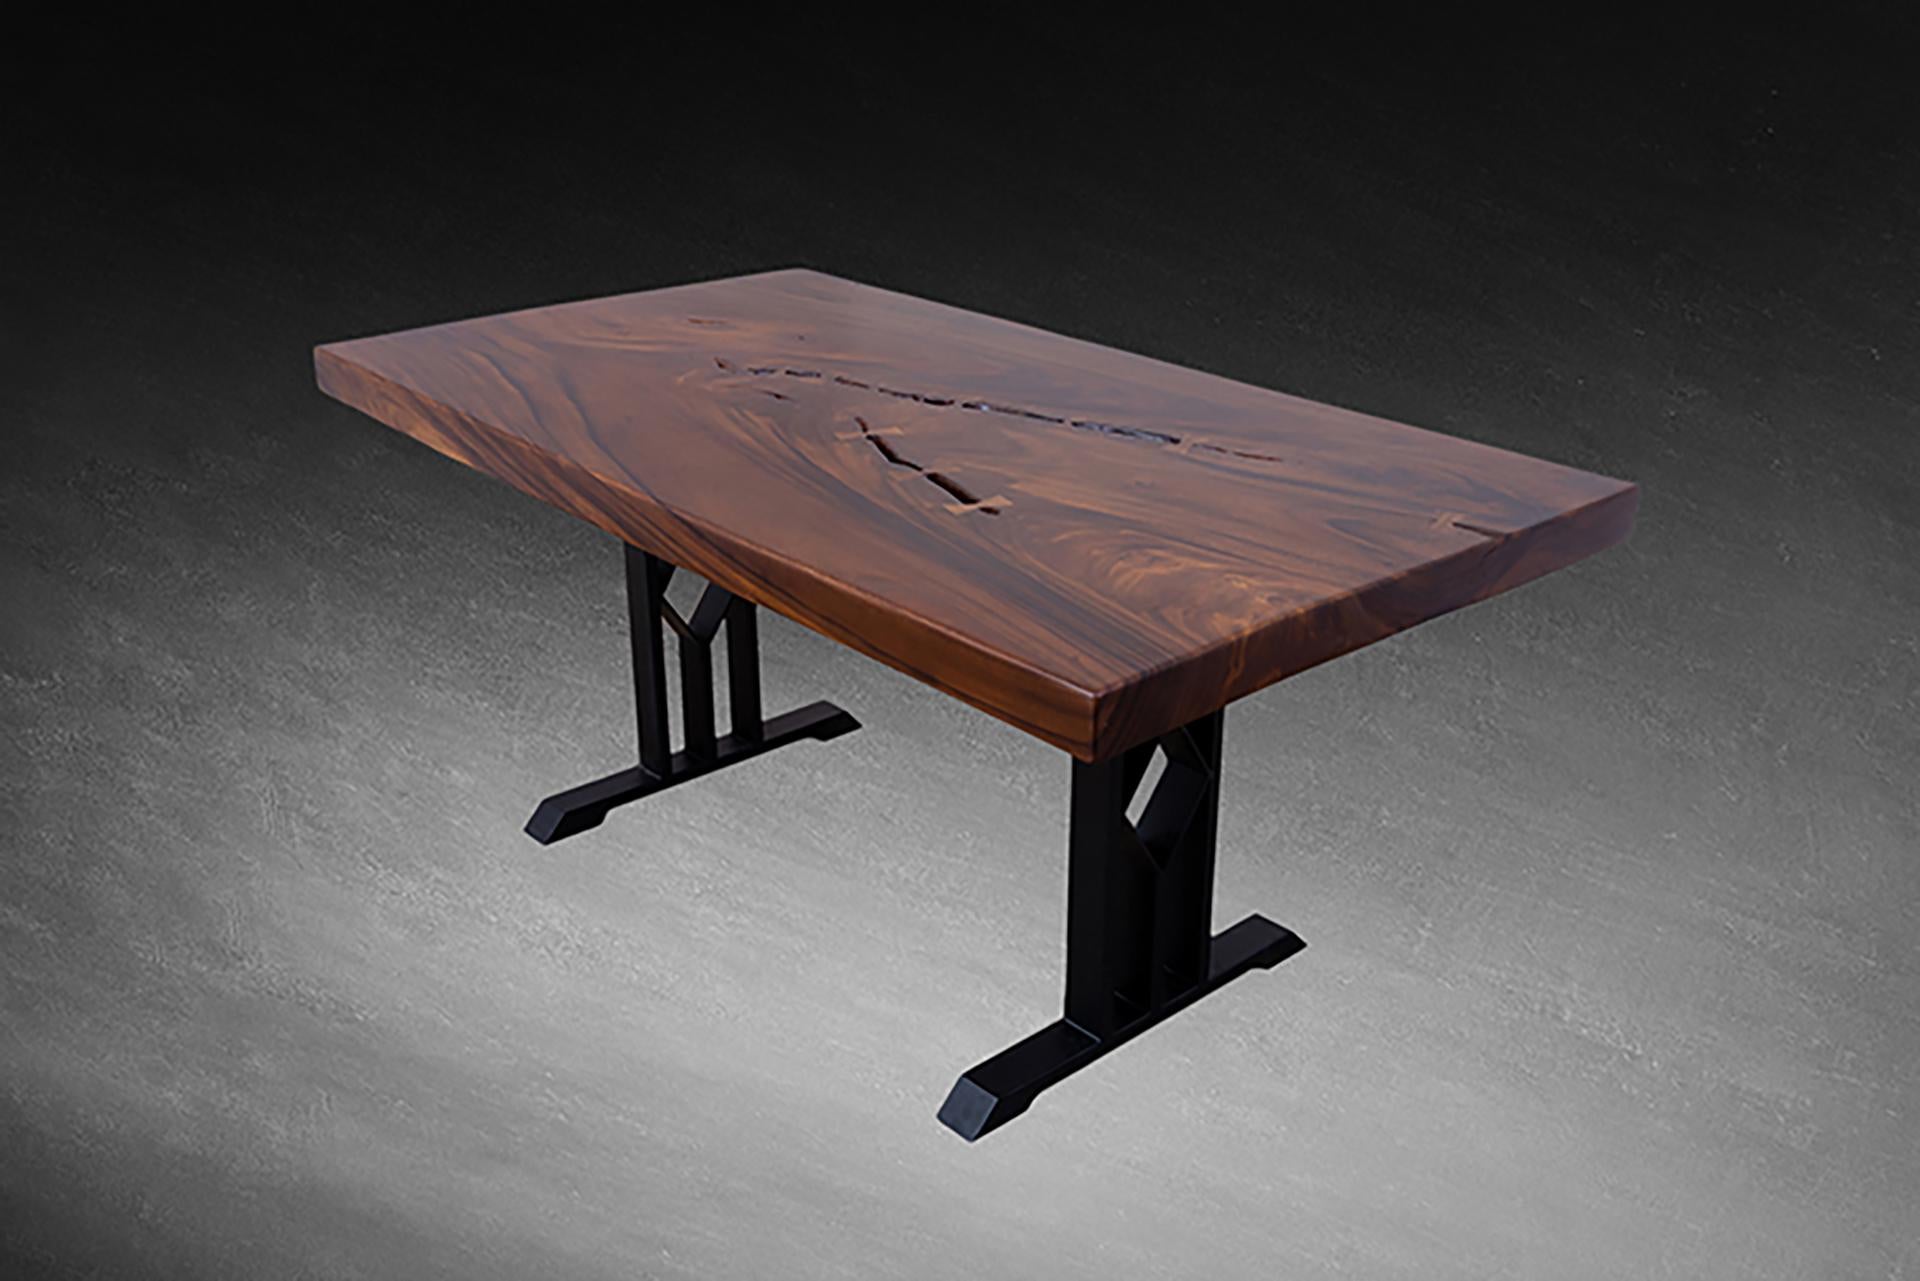 Hand-Crafted 100% Solid Siam Walnut / Acacia Slab with Black Steel Legs For Sale